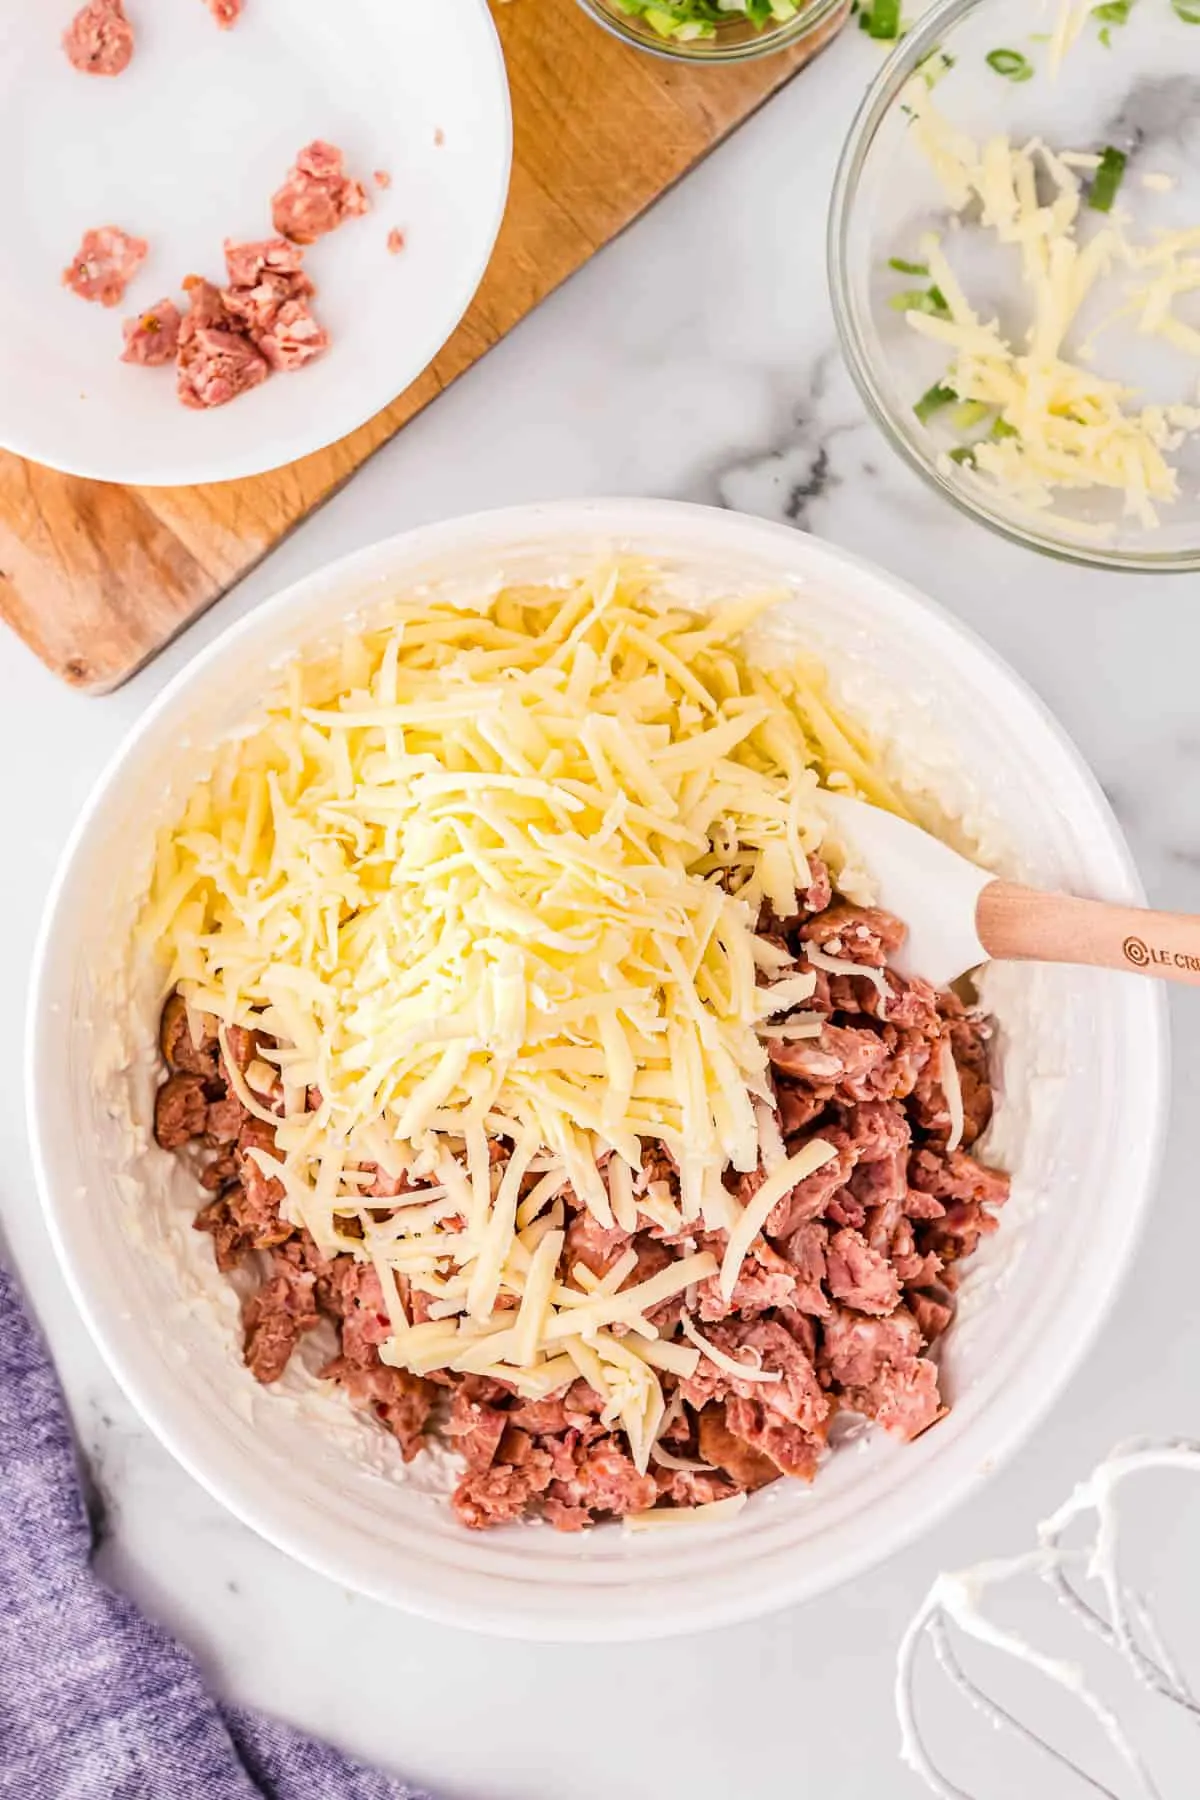 shredded cheese and sausage in a bowl